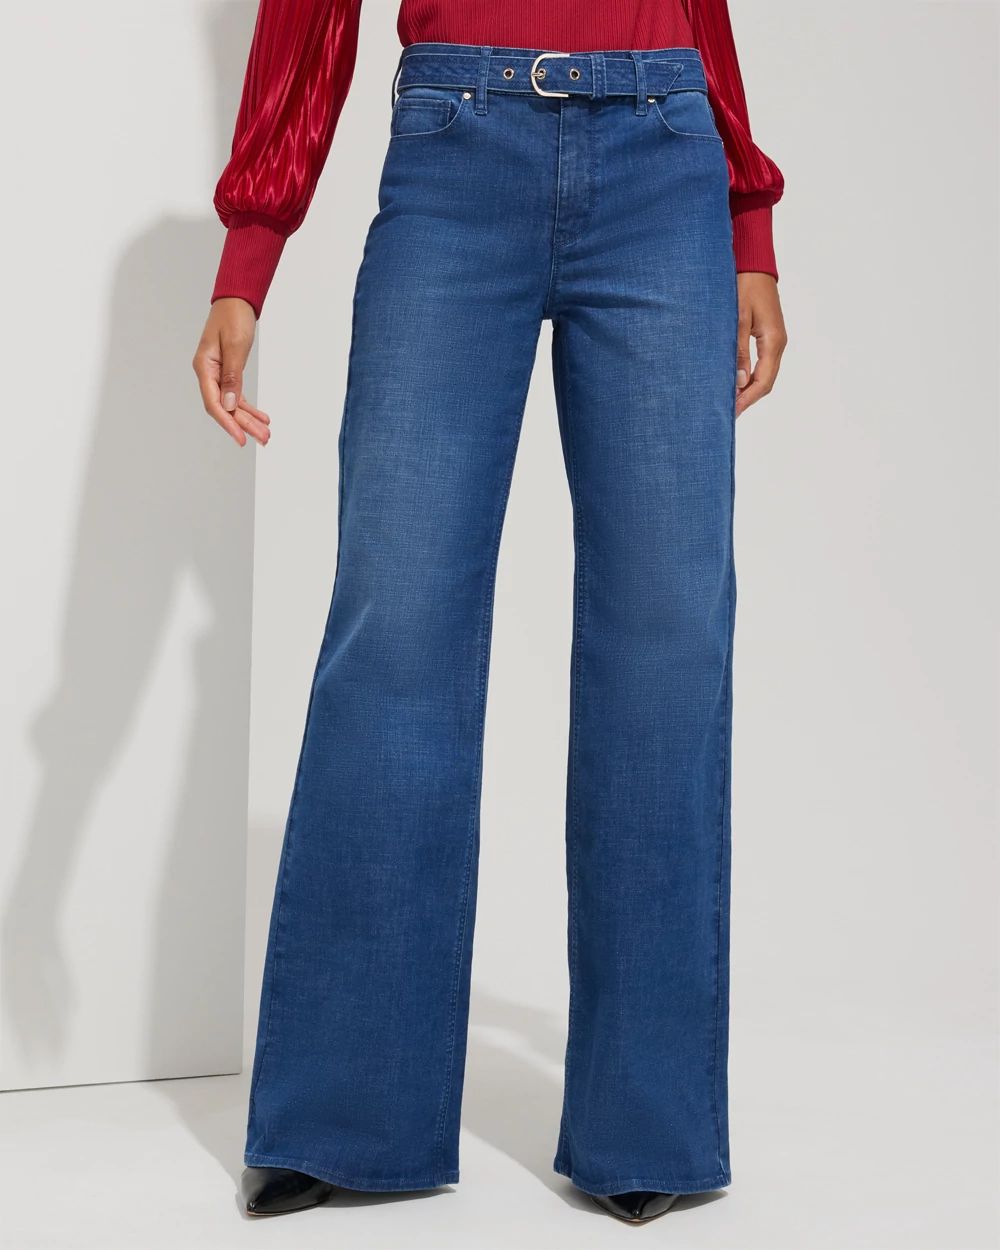 Outlet WHBM Belted High Rise Wide Leg Jeans click to view larger image.